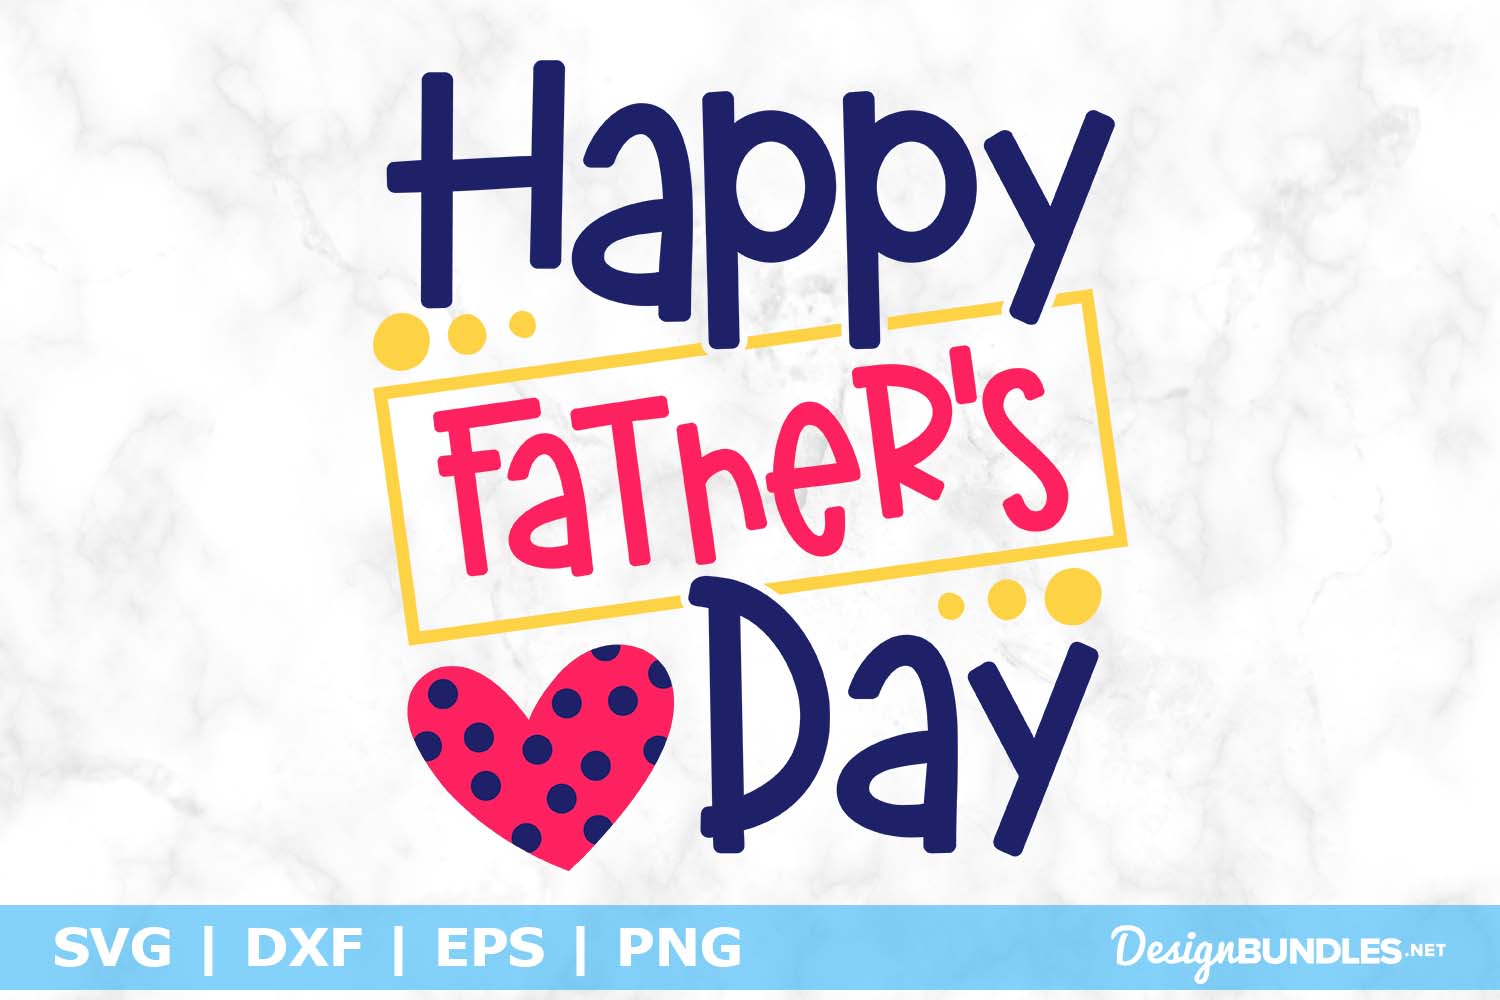 Happy Father's Day SVG File